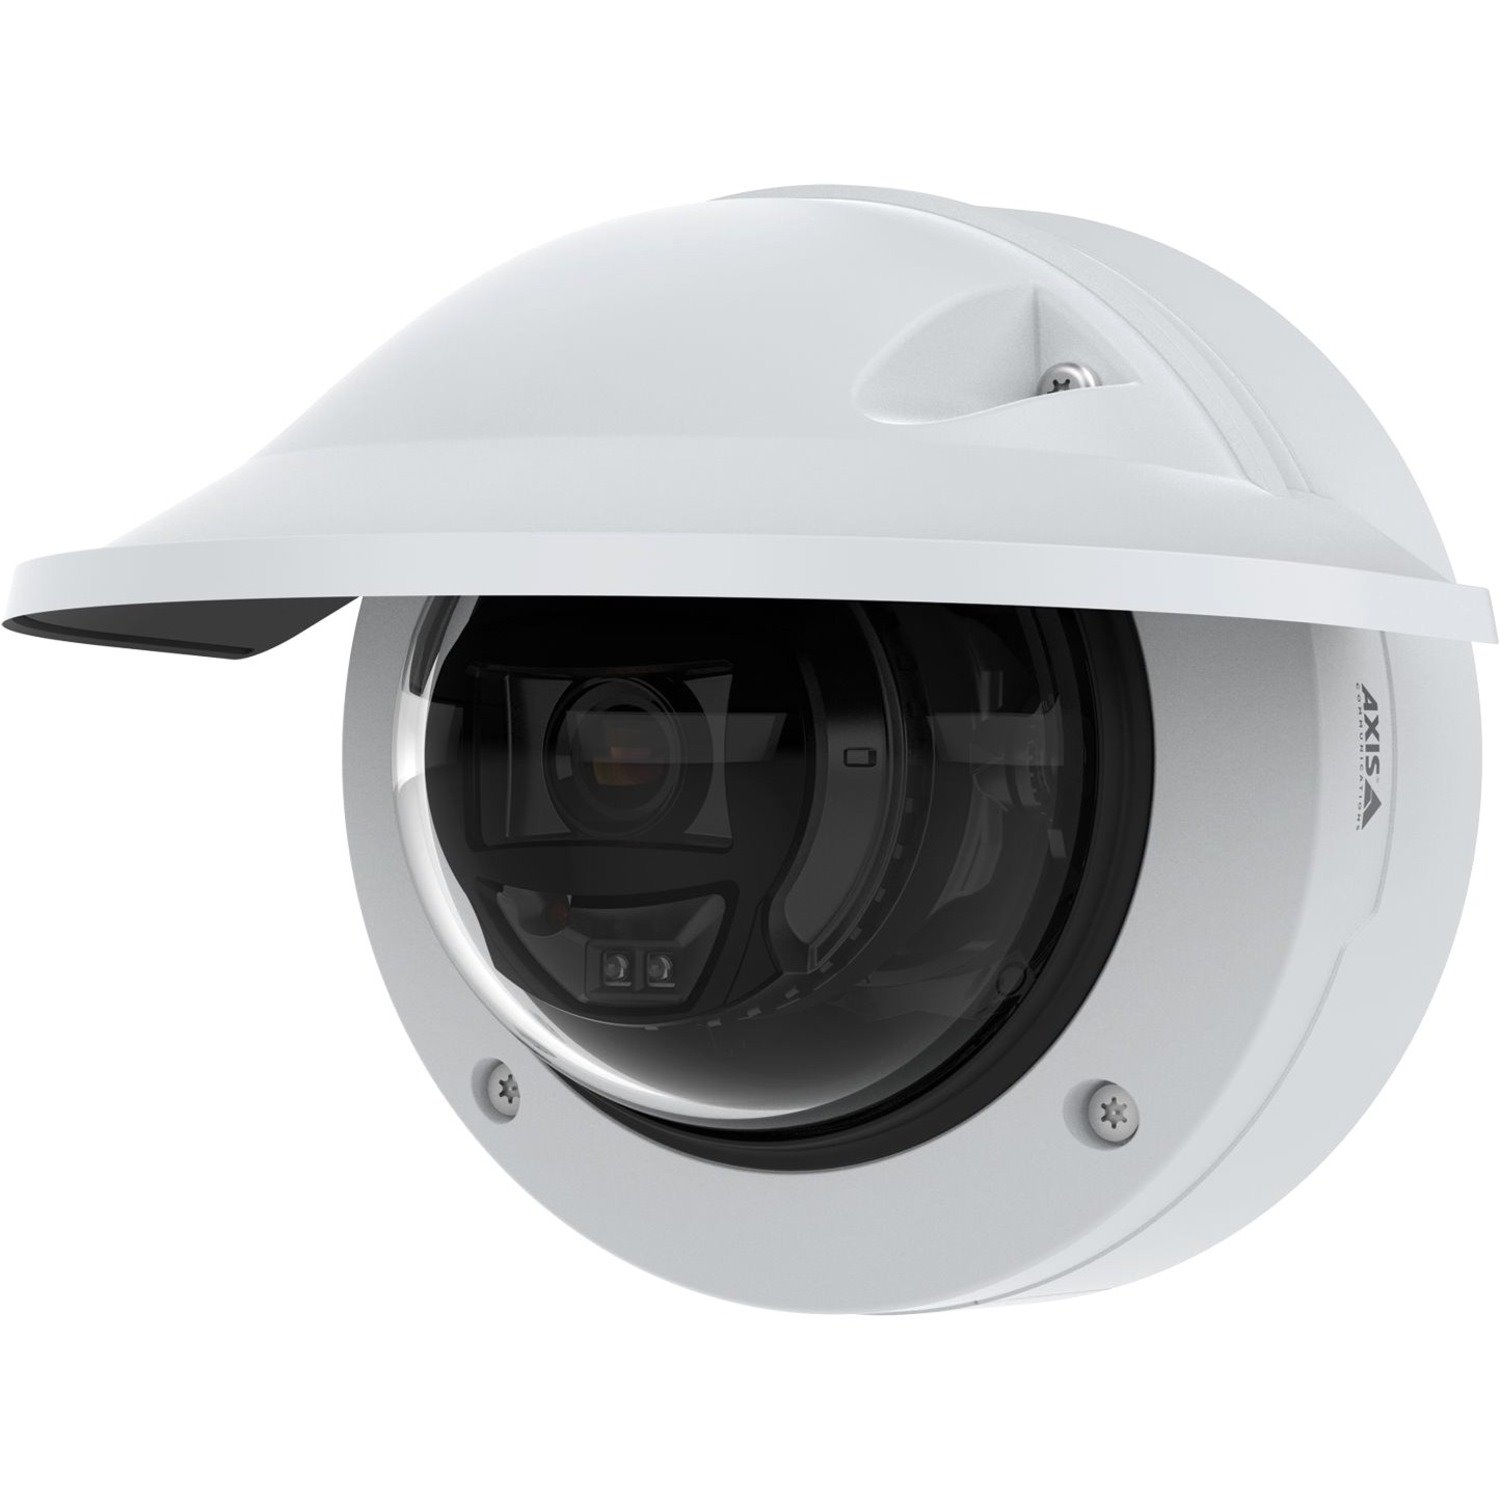 AXIS P3265-LVE 2 Megapixel Outdoor Full HD Network Camera - Colour - Dome